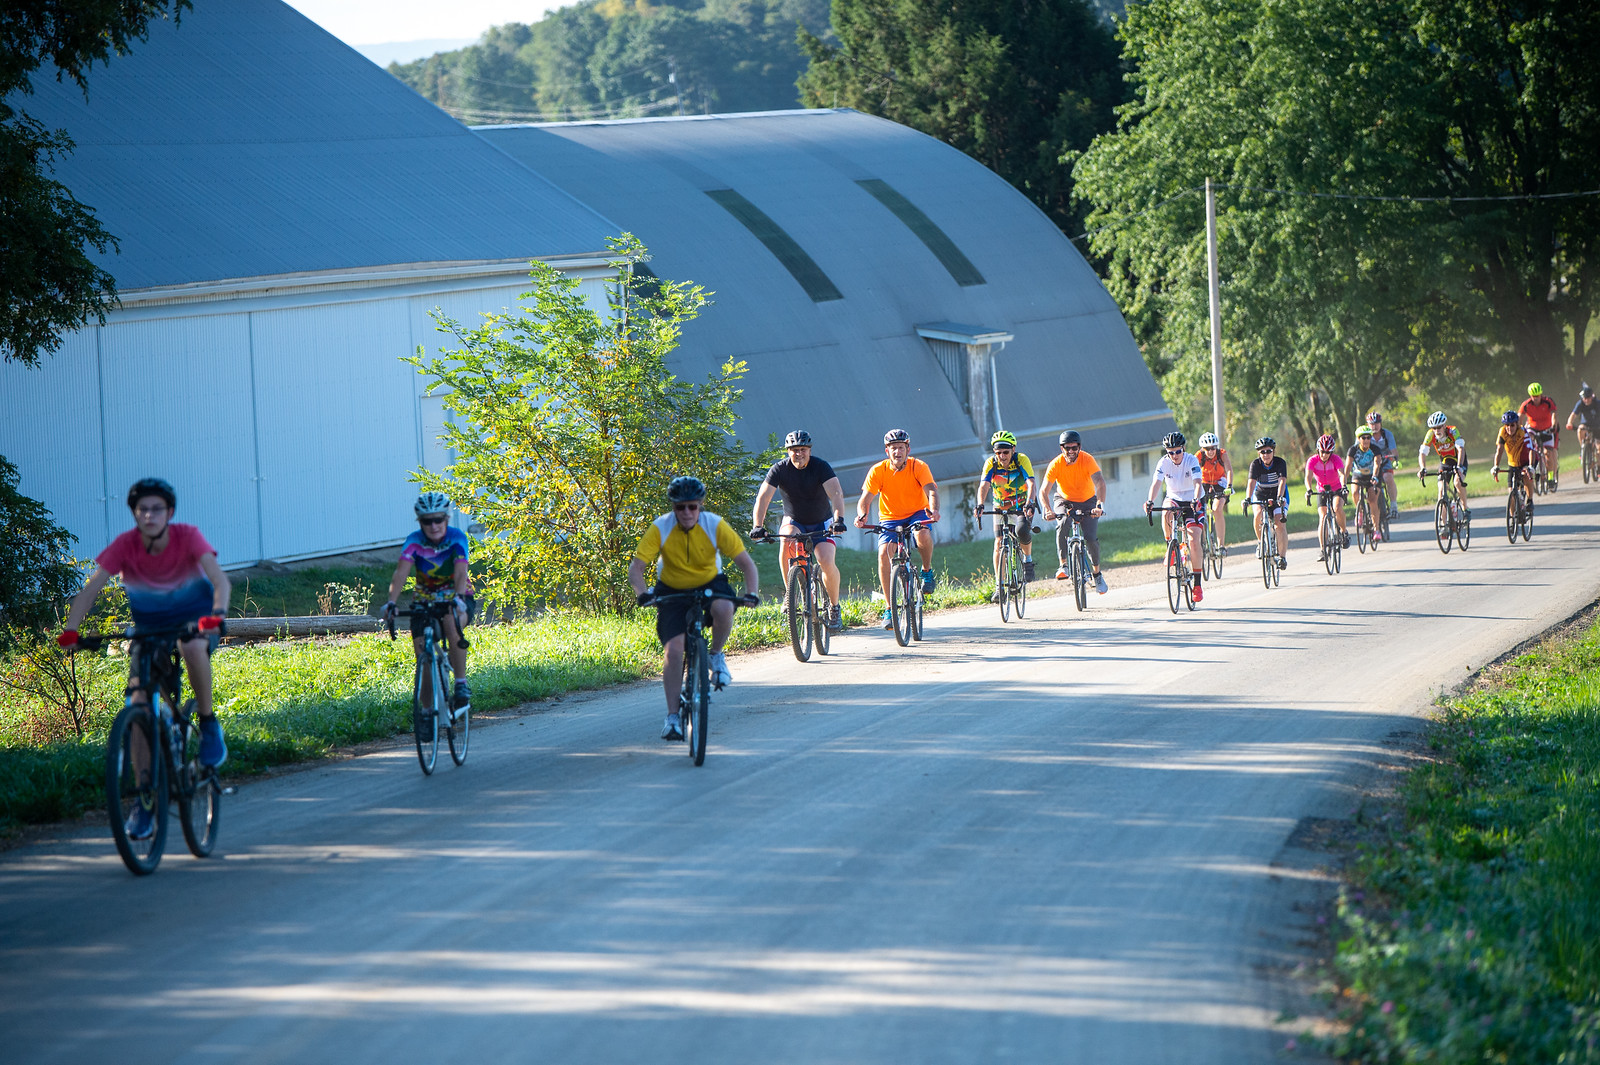 Group of cyclists riding on the 9-11 Memorial Trail